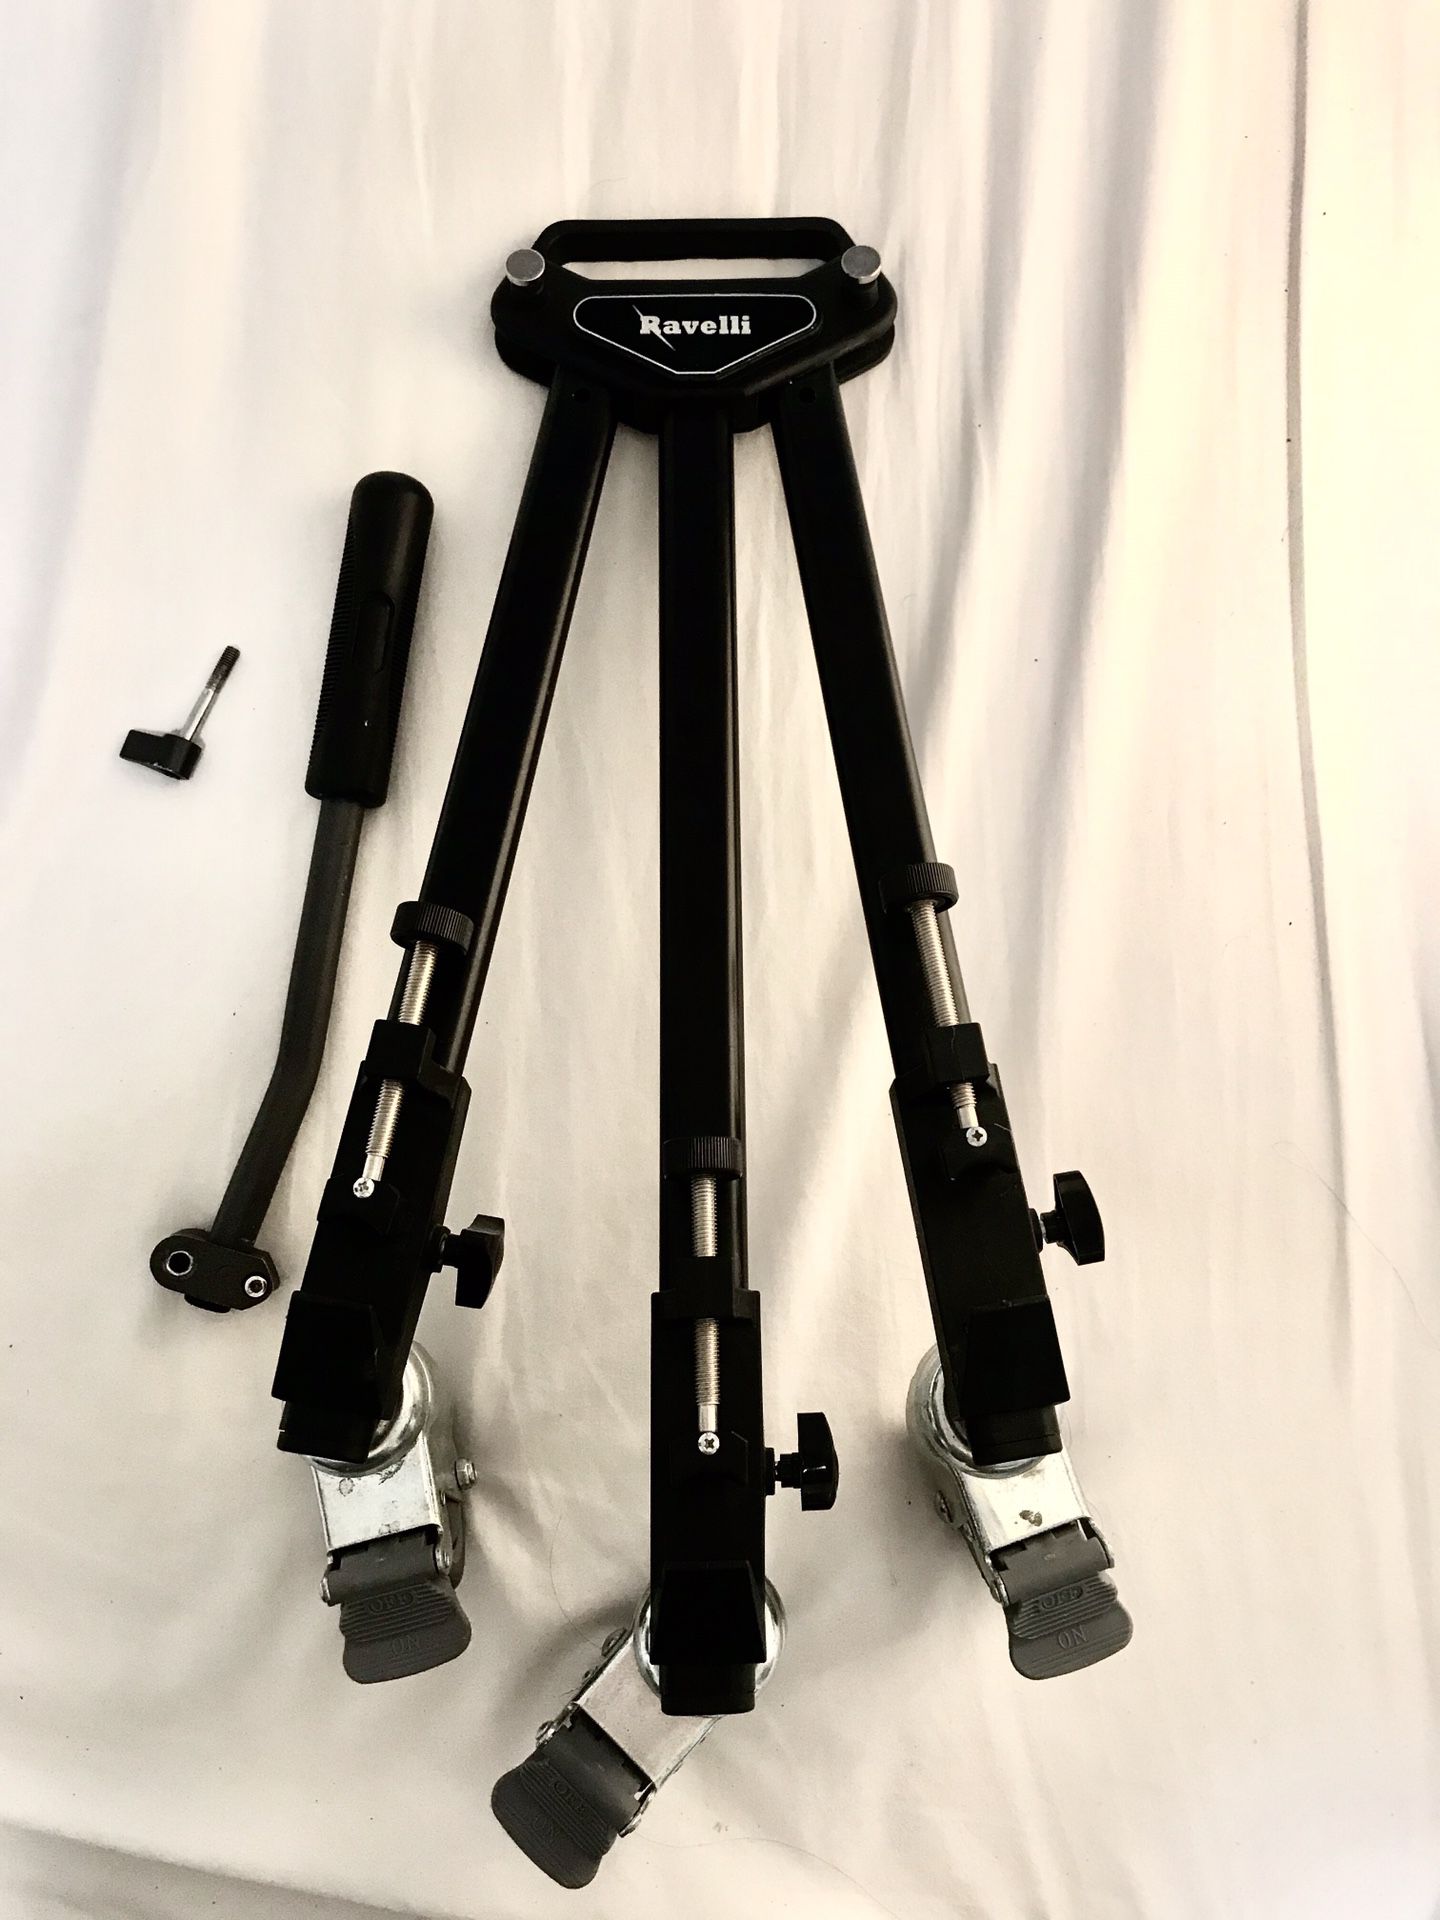 Ravelli Tripod Dolly - Mint Condition NEVER USED